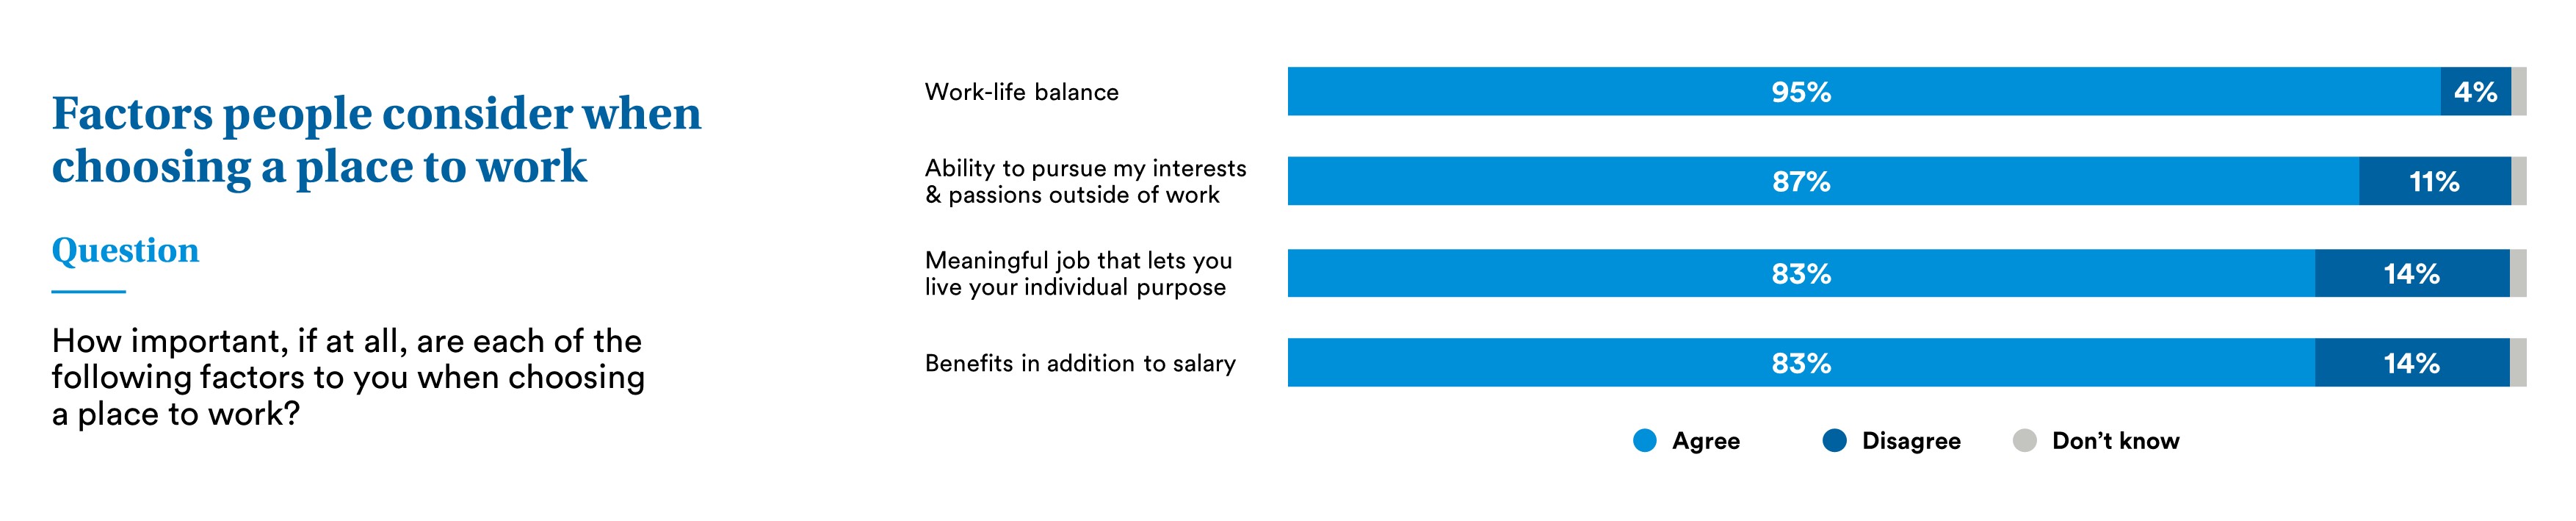 Factors people consider when choosing a place to work. Question: How important, if at all, are each of the following factors to ou when choosing a place to work? Work-life balance, 95%. Ability to pursue my interests and passions outside of work, 87%. Meaningful job that lets you live your individual purpose, 83%. Benefits in addition to salary, 83%.